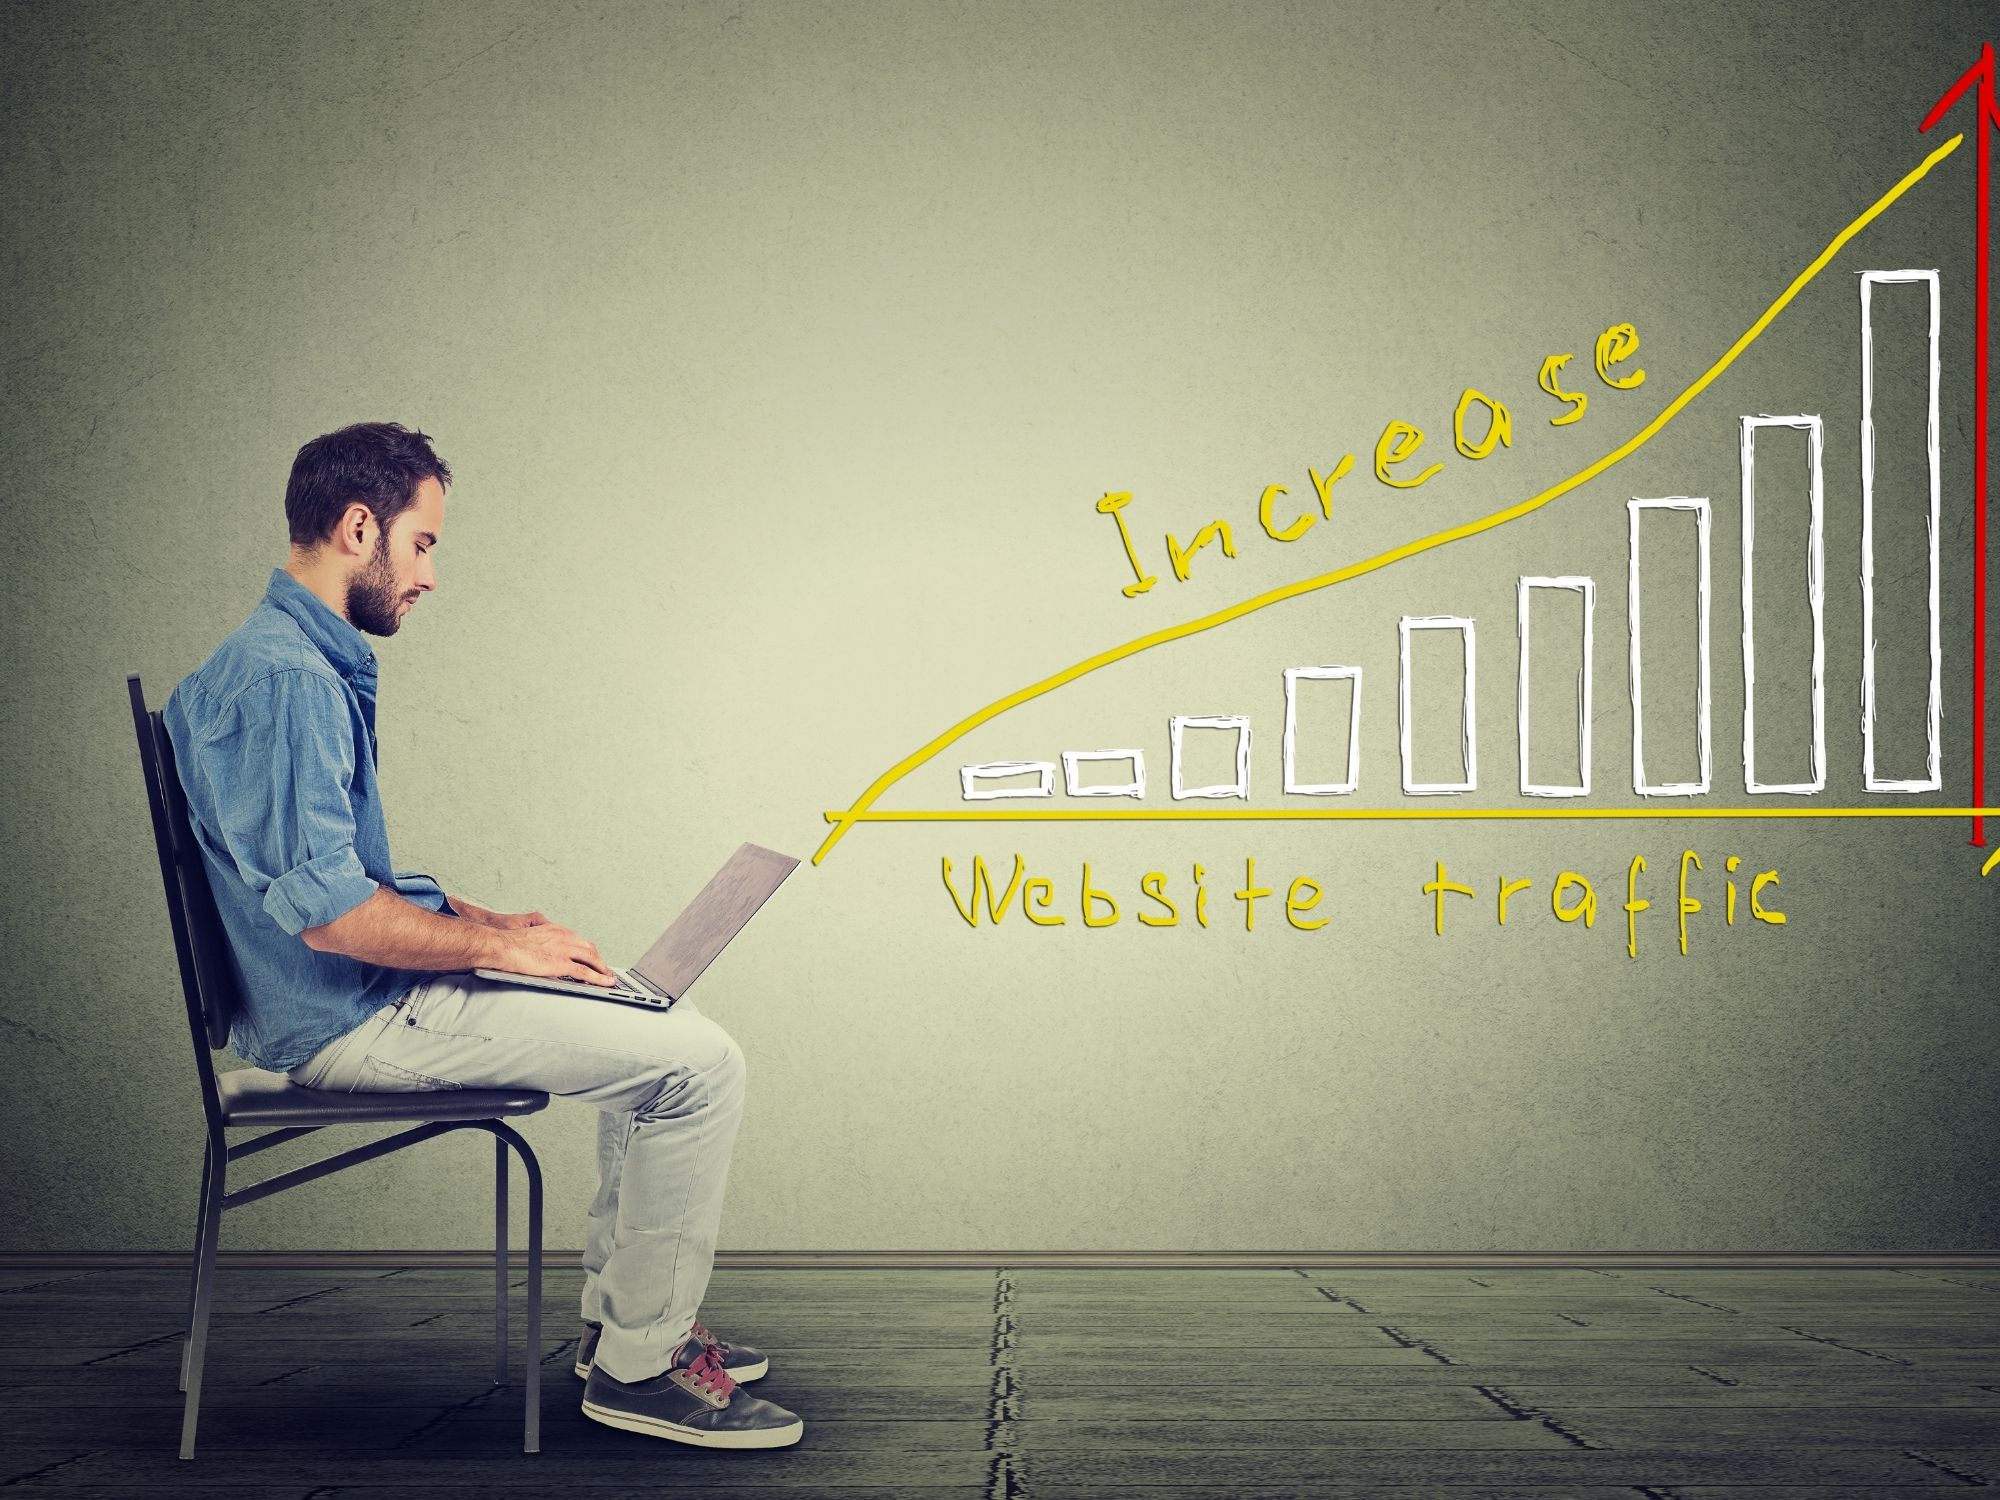 18 Ways to Increase Traffic to Your Website